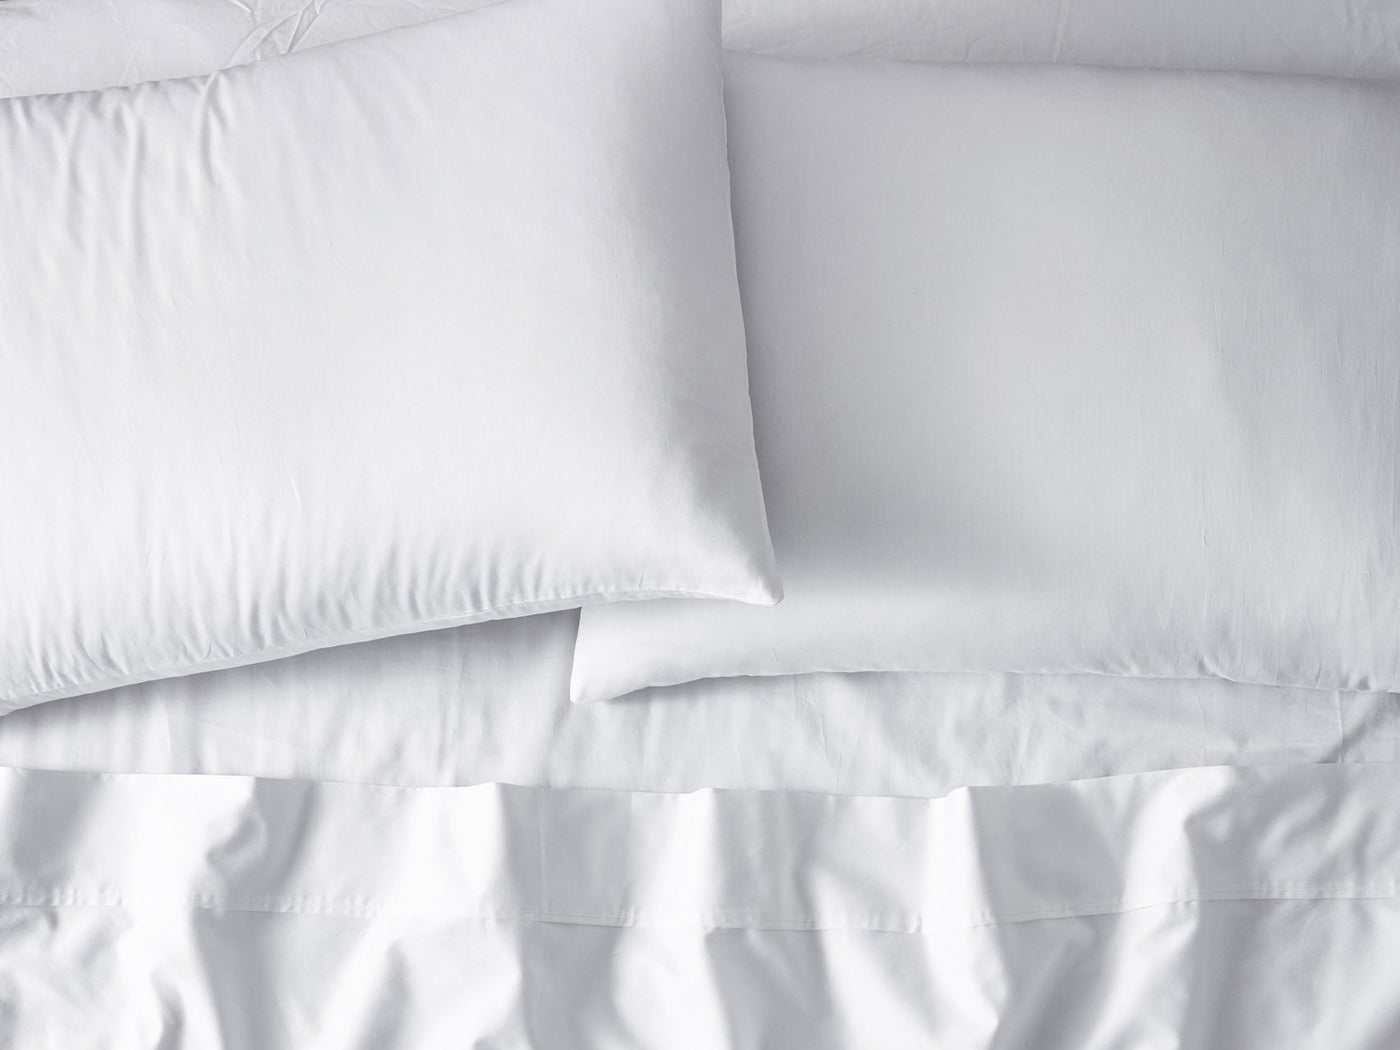 How to Keep Sheets White & Fresh